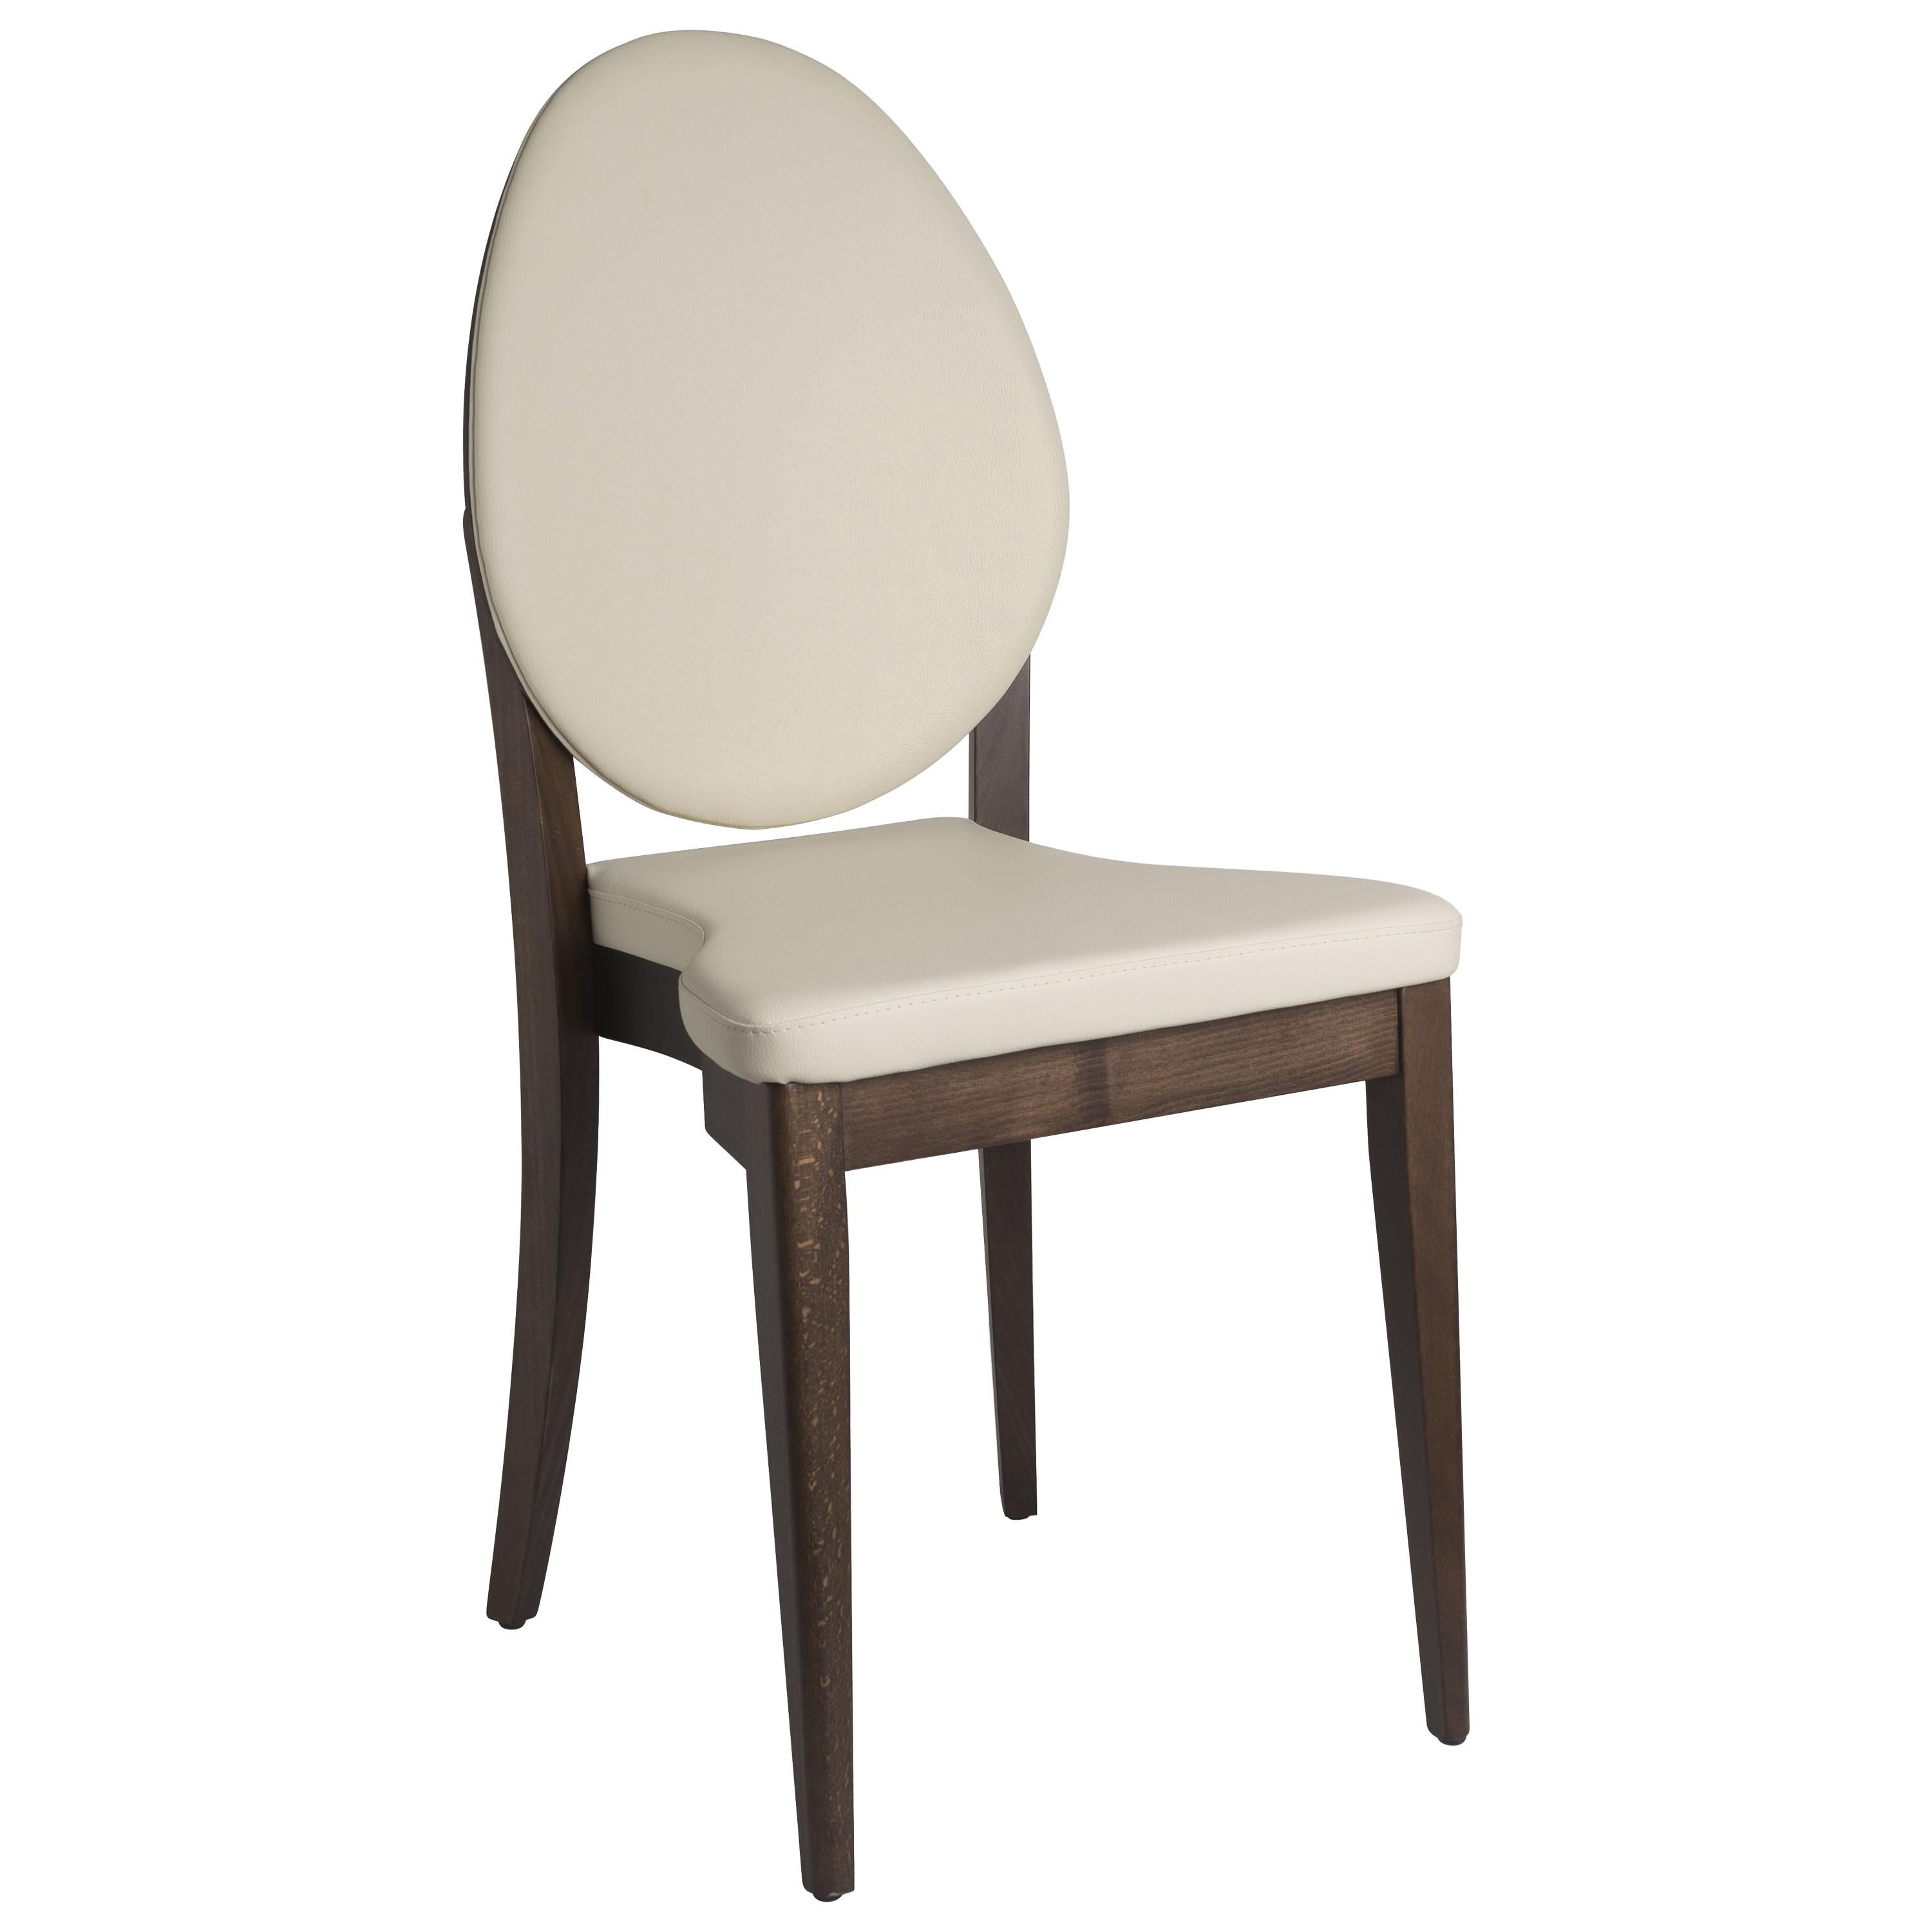 Chair Malaga, Made in Italy